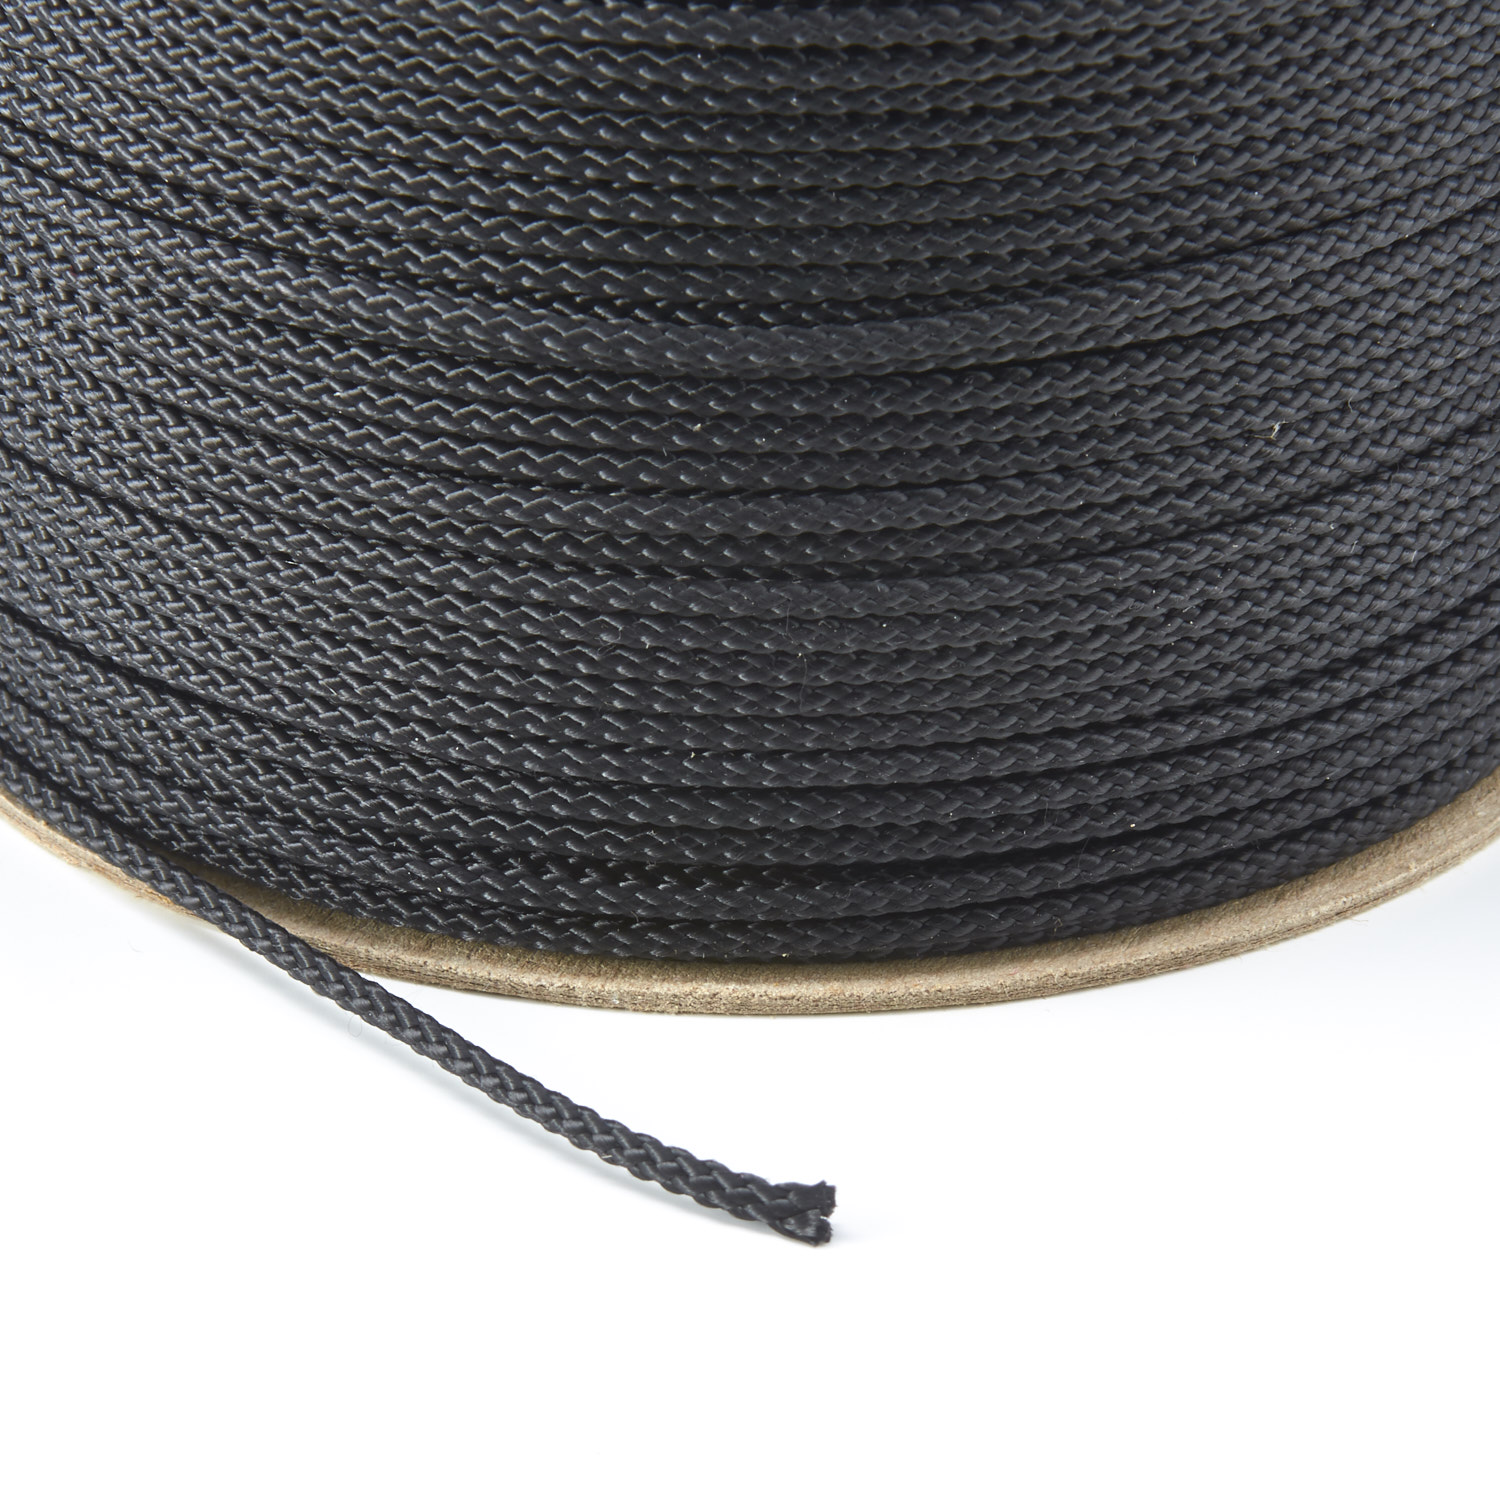 2mm Round Polypropylene Cord - Braided Poly Cord Strong String